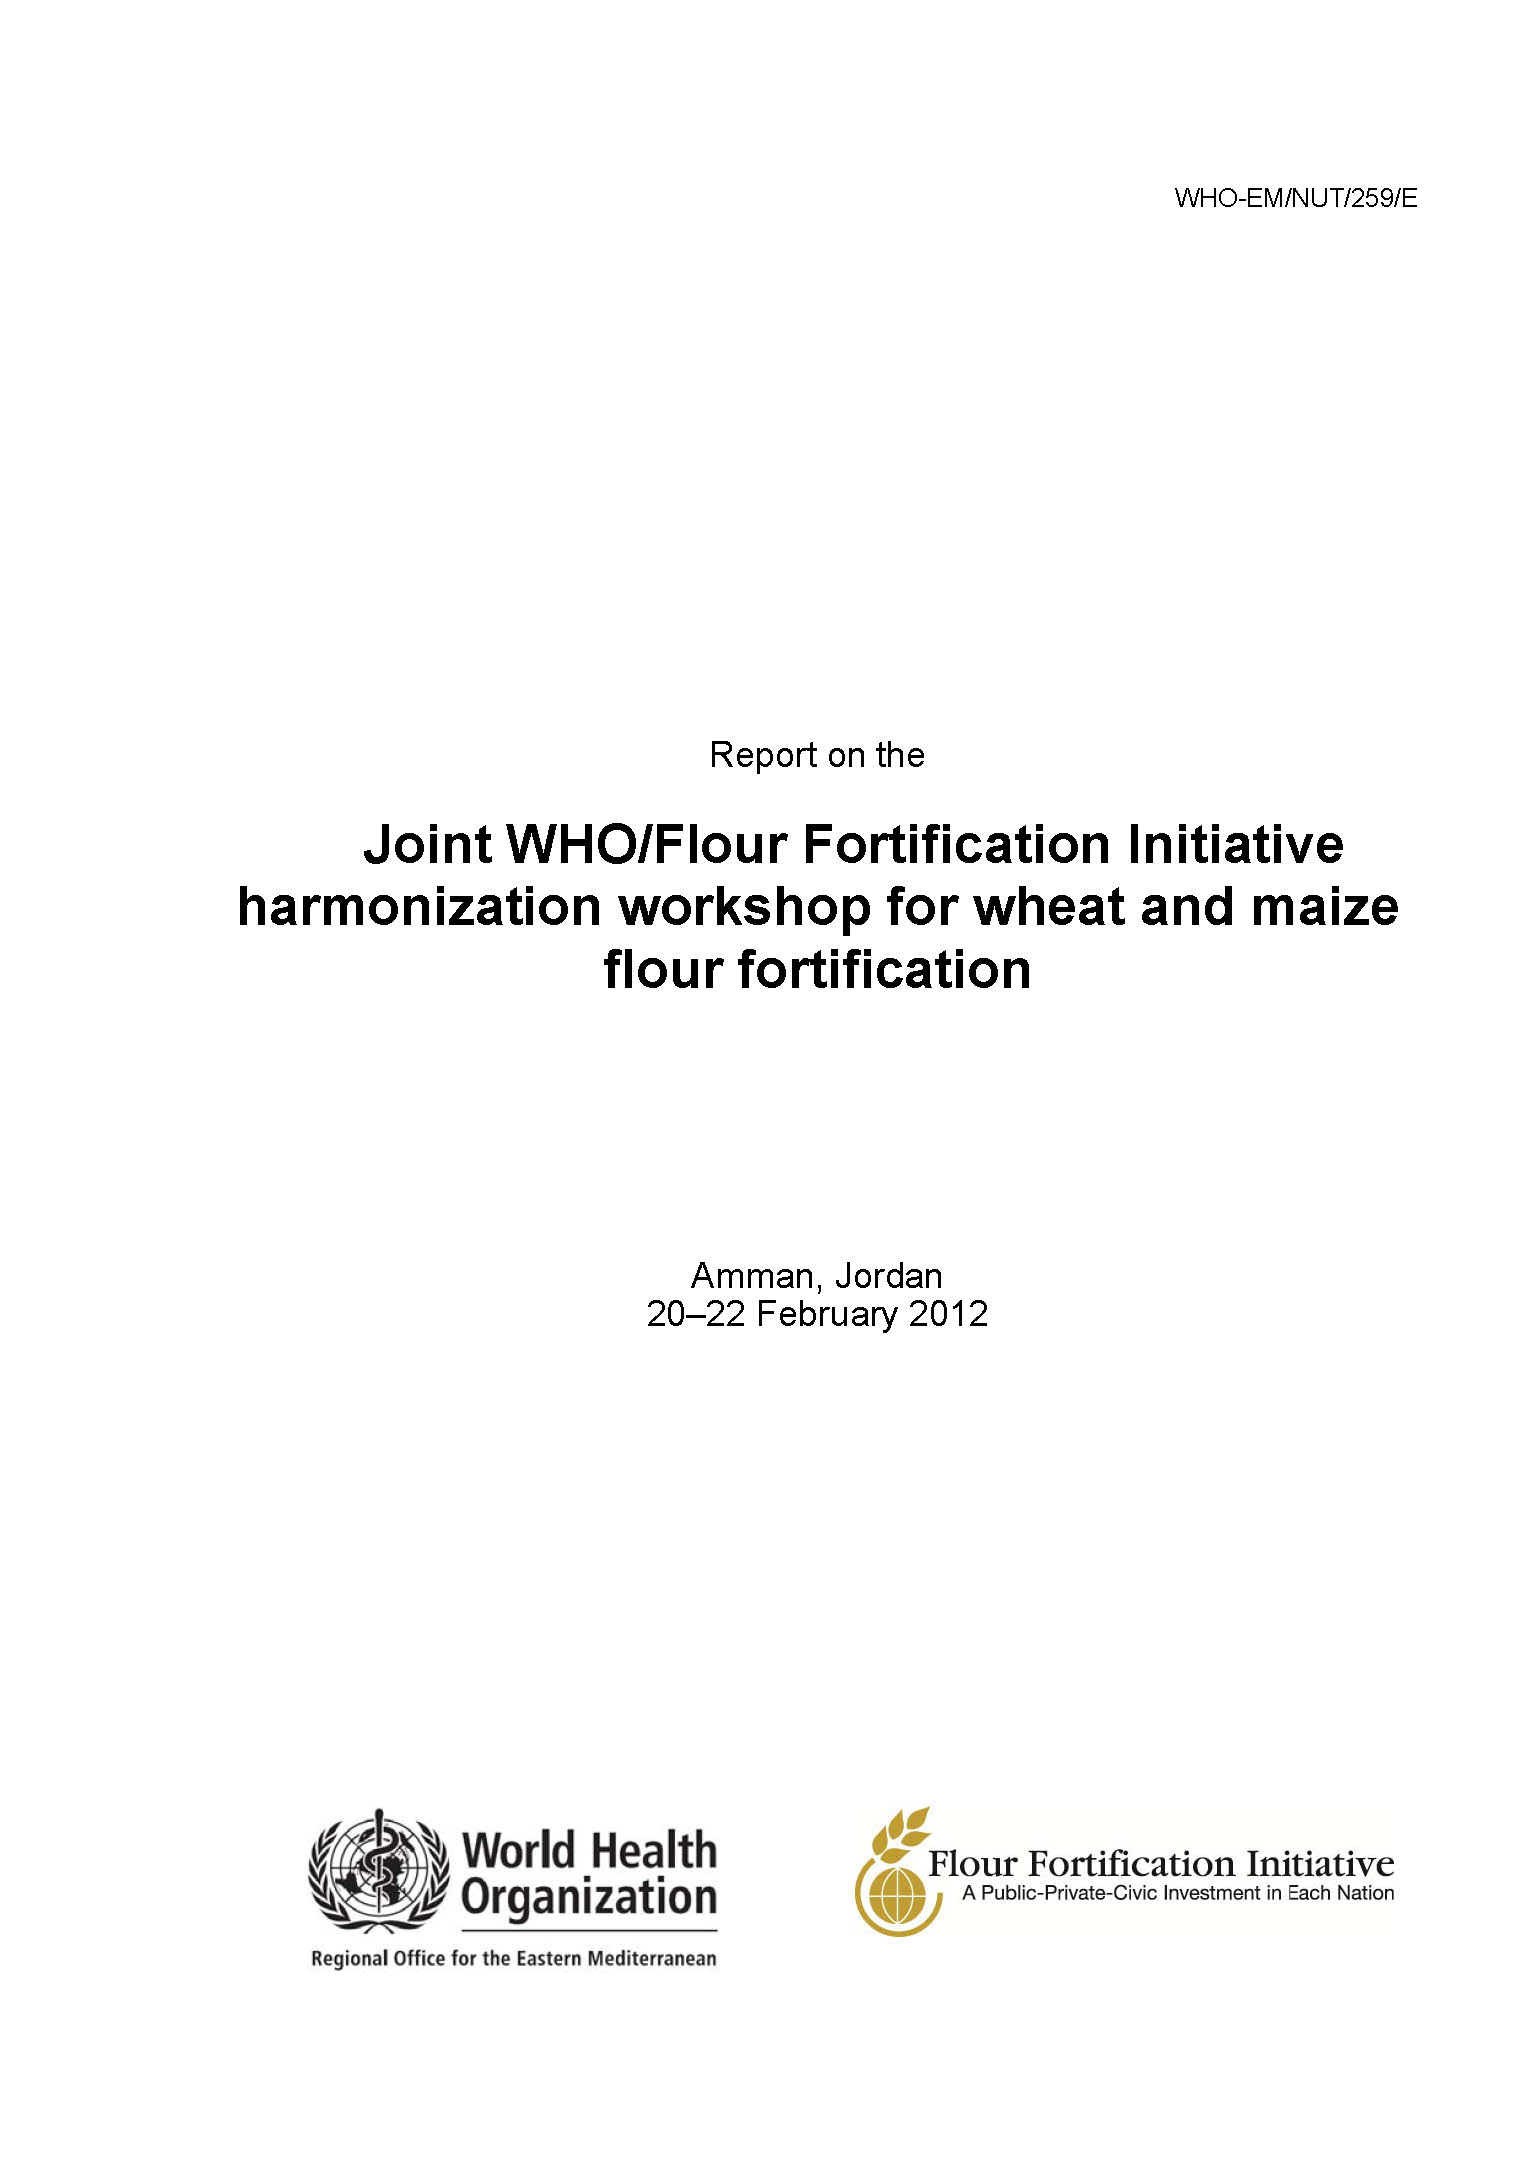 report_on_the_joint_who_flour_fortification_initiative_harmonization_workshop_for_wheat_and_maize_flour_fortification